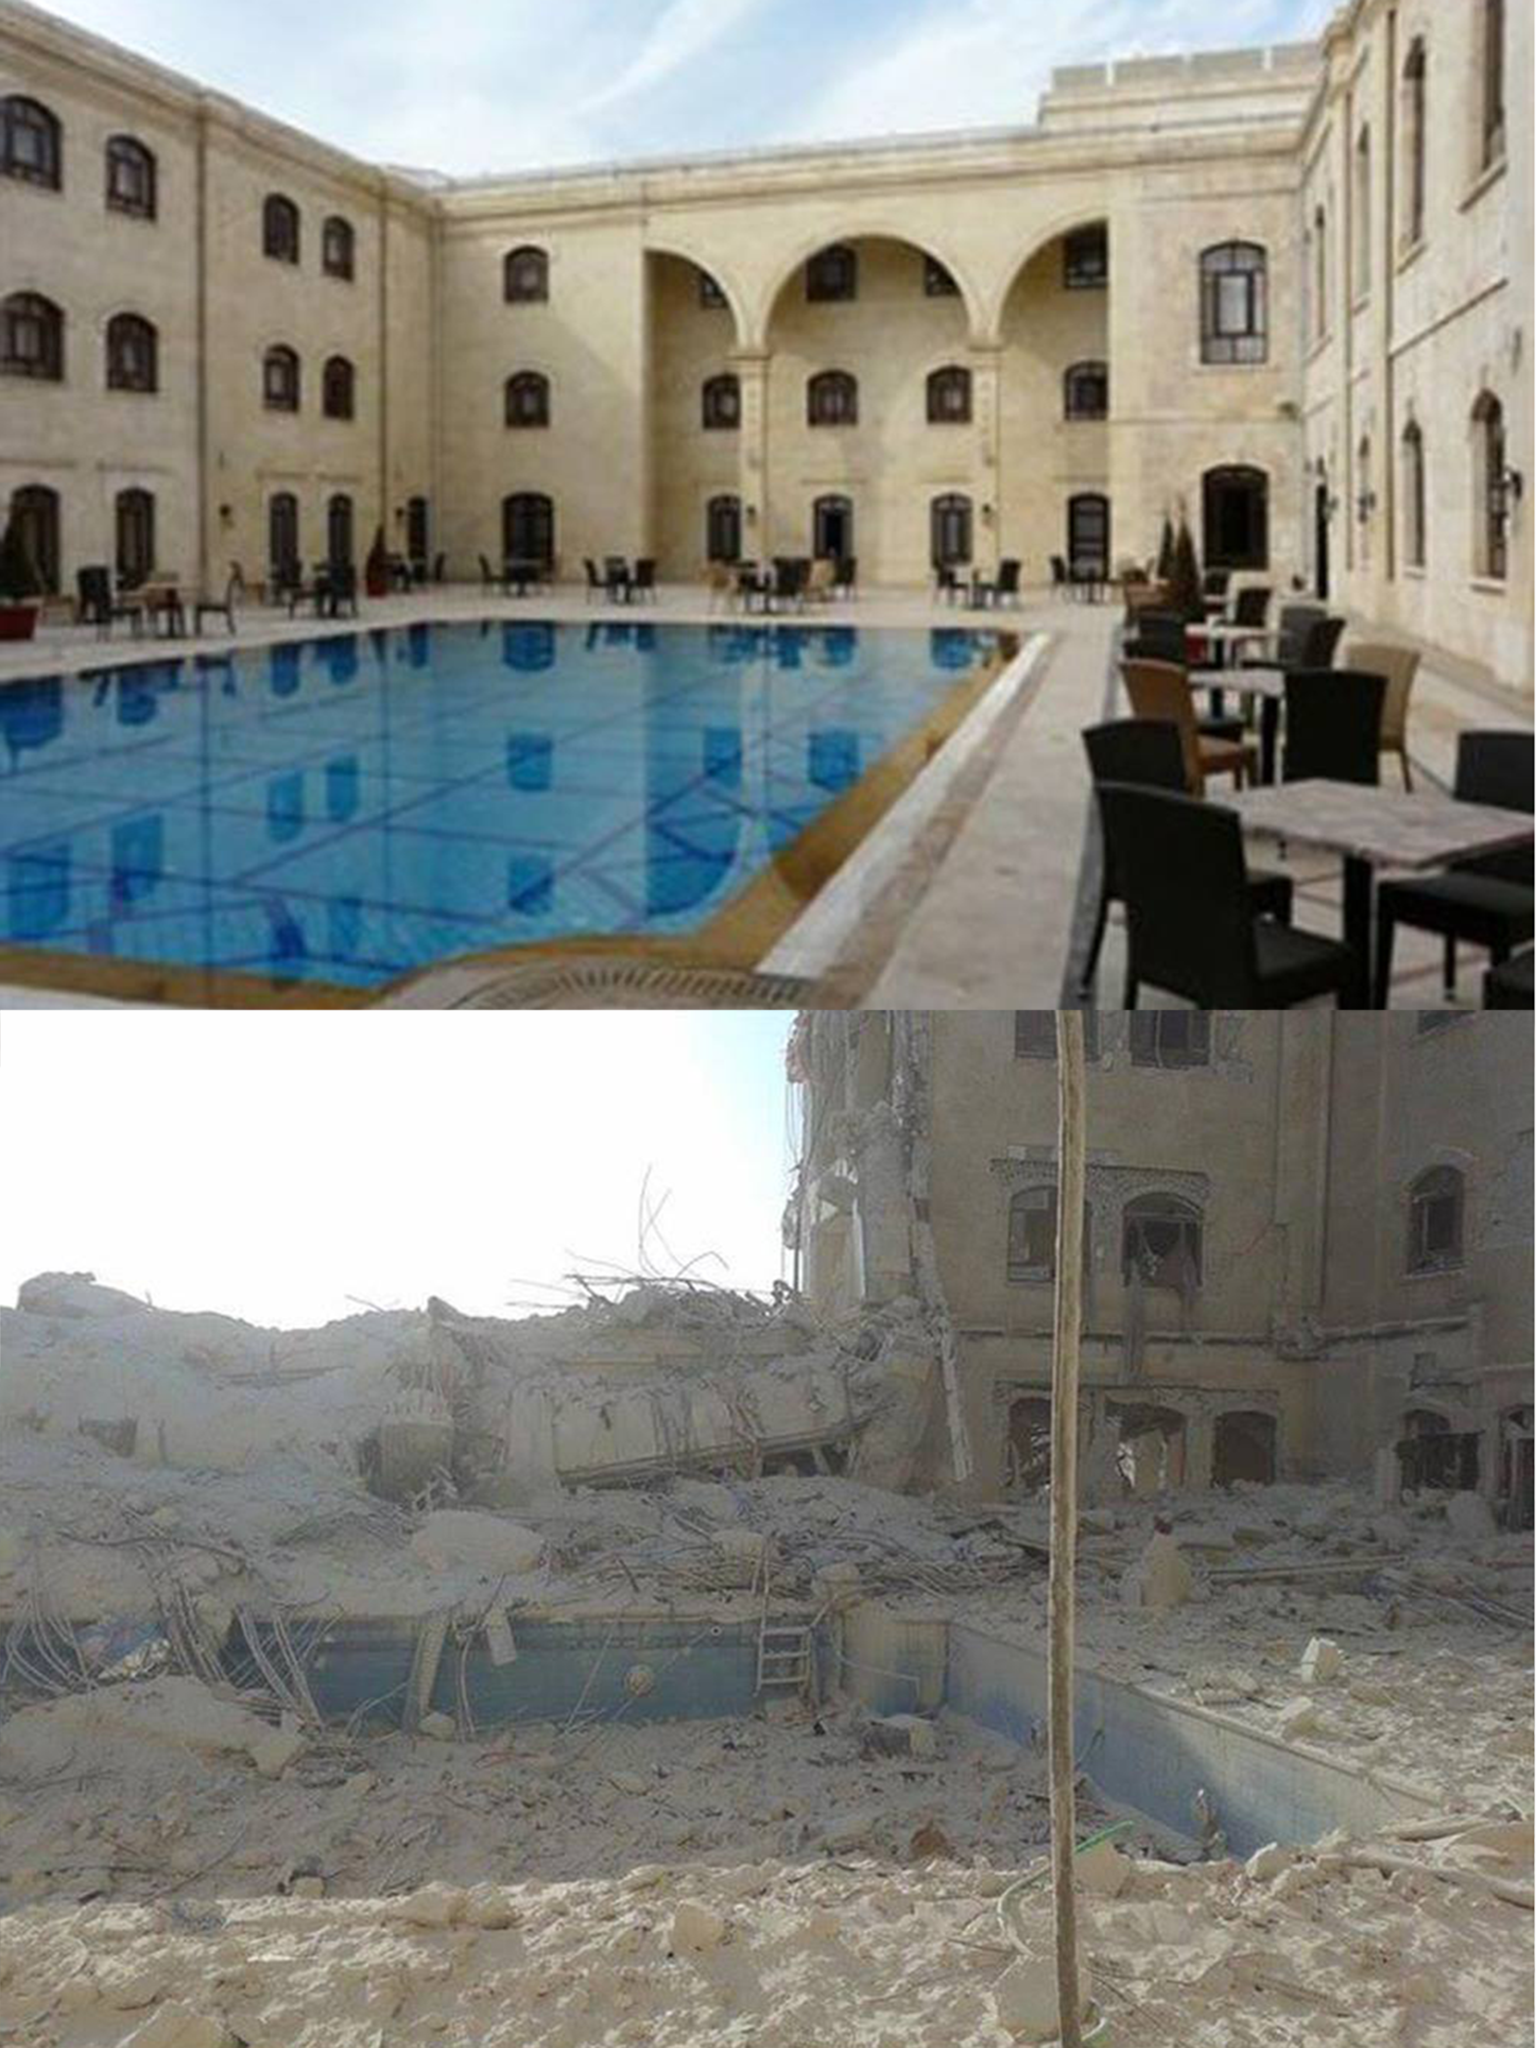 It’s easy to imagine what a stay in the Carlton Citadel Hotel might have been like. The Islamic Front rebel group claimed responsibility for the May 2014 blast, claiming it had killed 50 soldiers